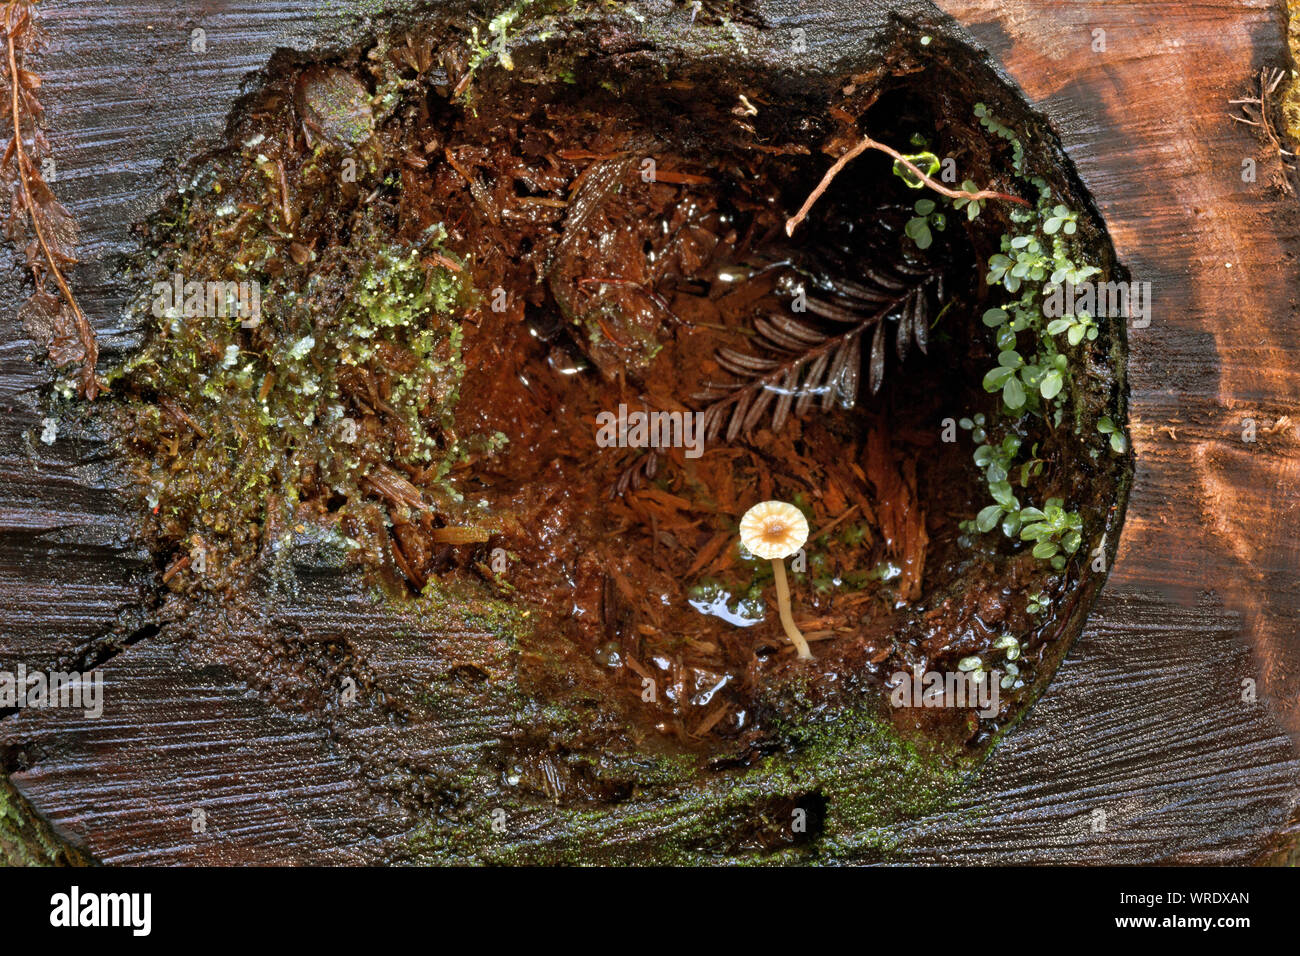 CA03523-00...CALIFORNIA - A naturally formed terrarium of moss,plants,alge, and a mushroom growing in a cut log along the side of the Brown Creek Tr. Stock Photo